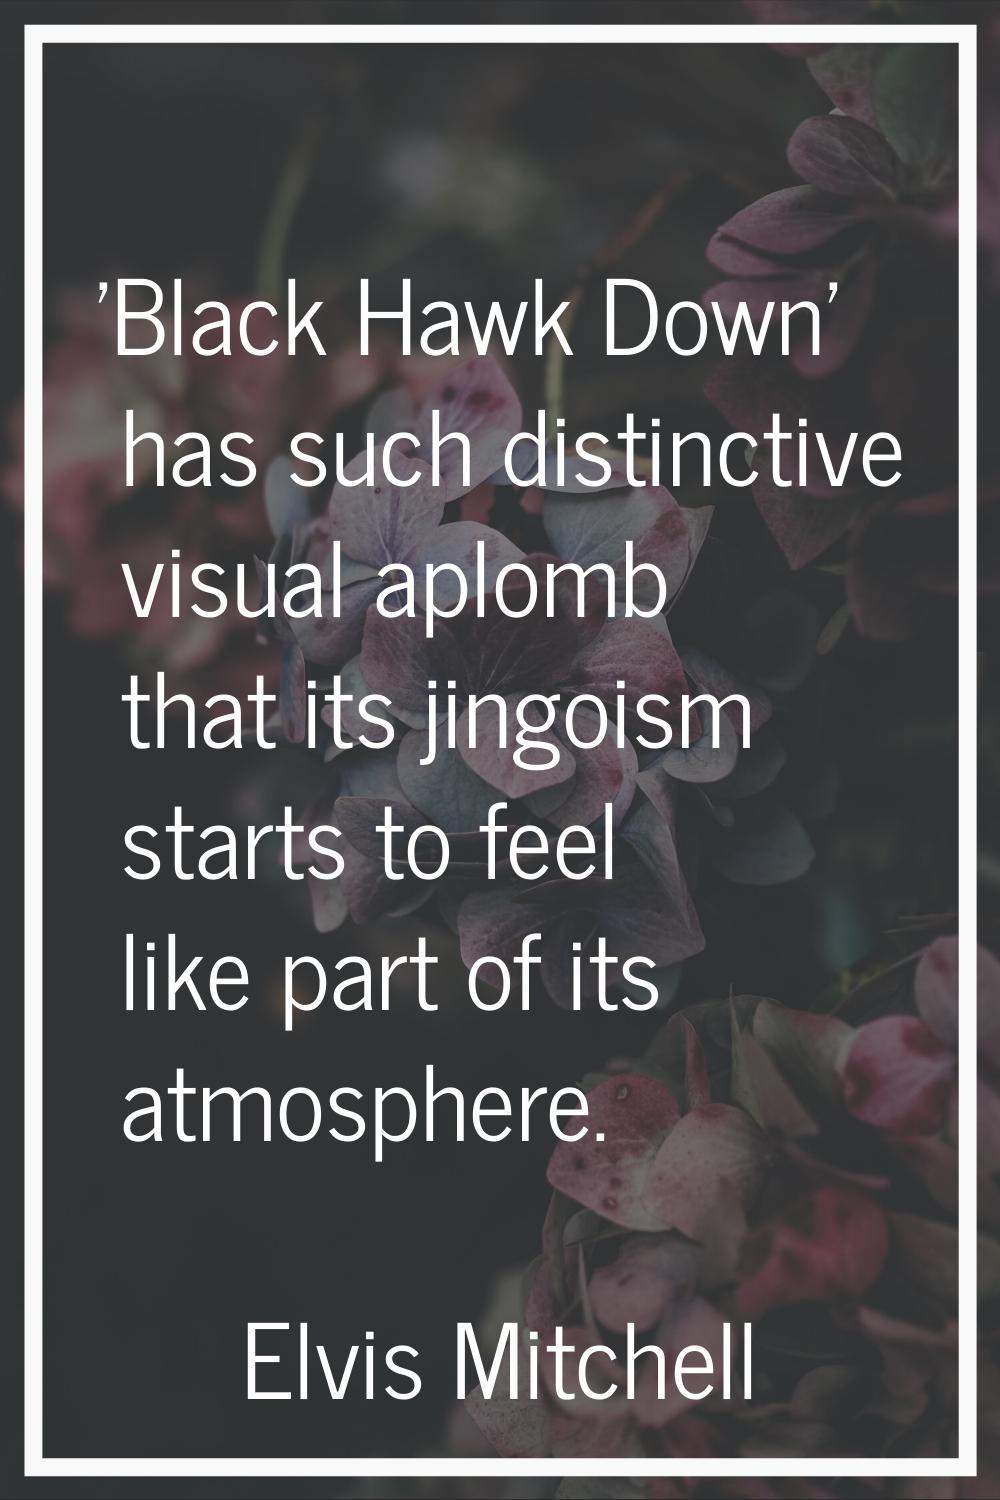 'Black Hawk Down' has such distinctive visual aplomb that its jingoism starts to feel like part of 